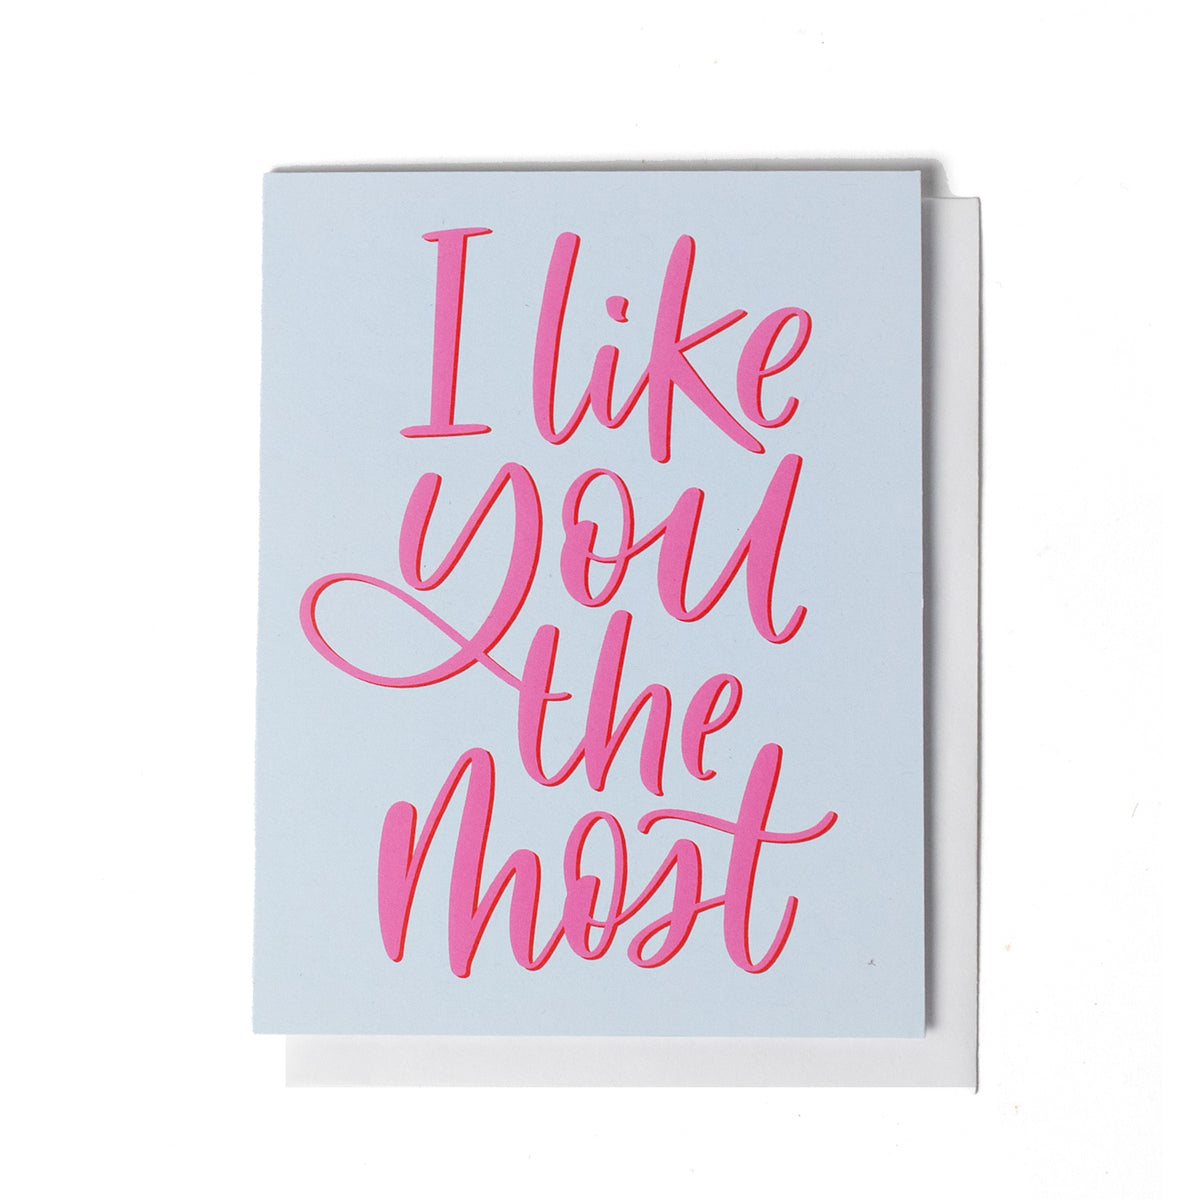 Tickled Floral sells Justine Ma cards. This card says I Like You The Most